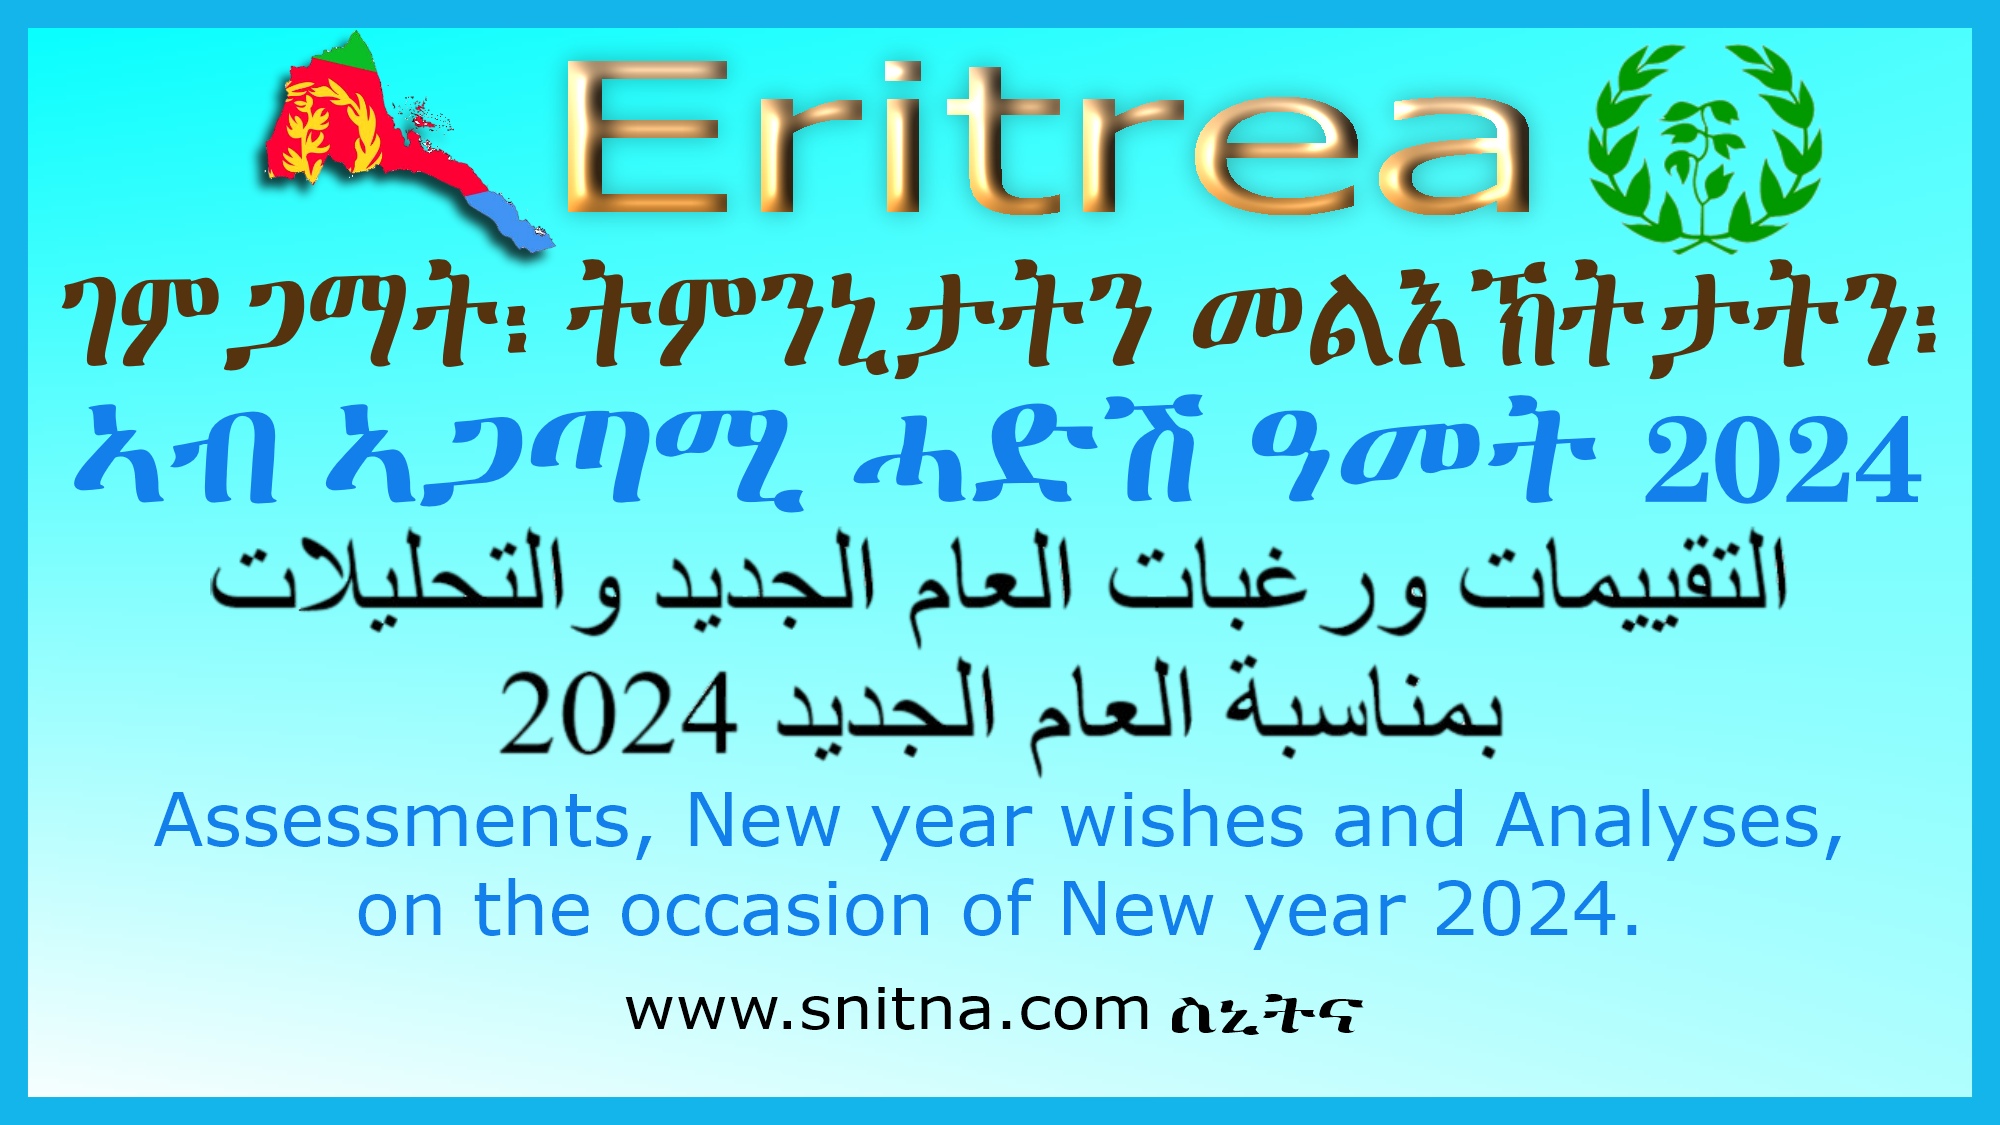 Eritrea: Assessments, New year wishes and Analyses, on the occasion of New year 2024.